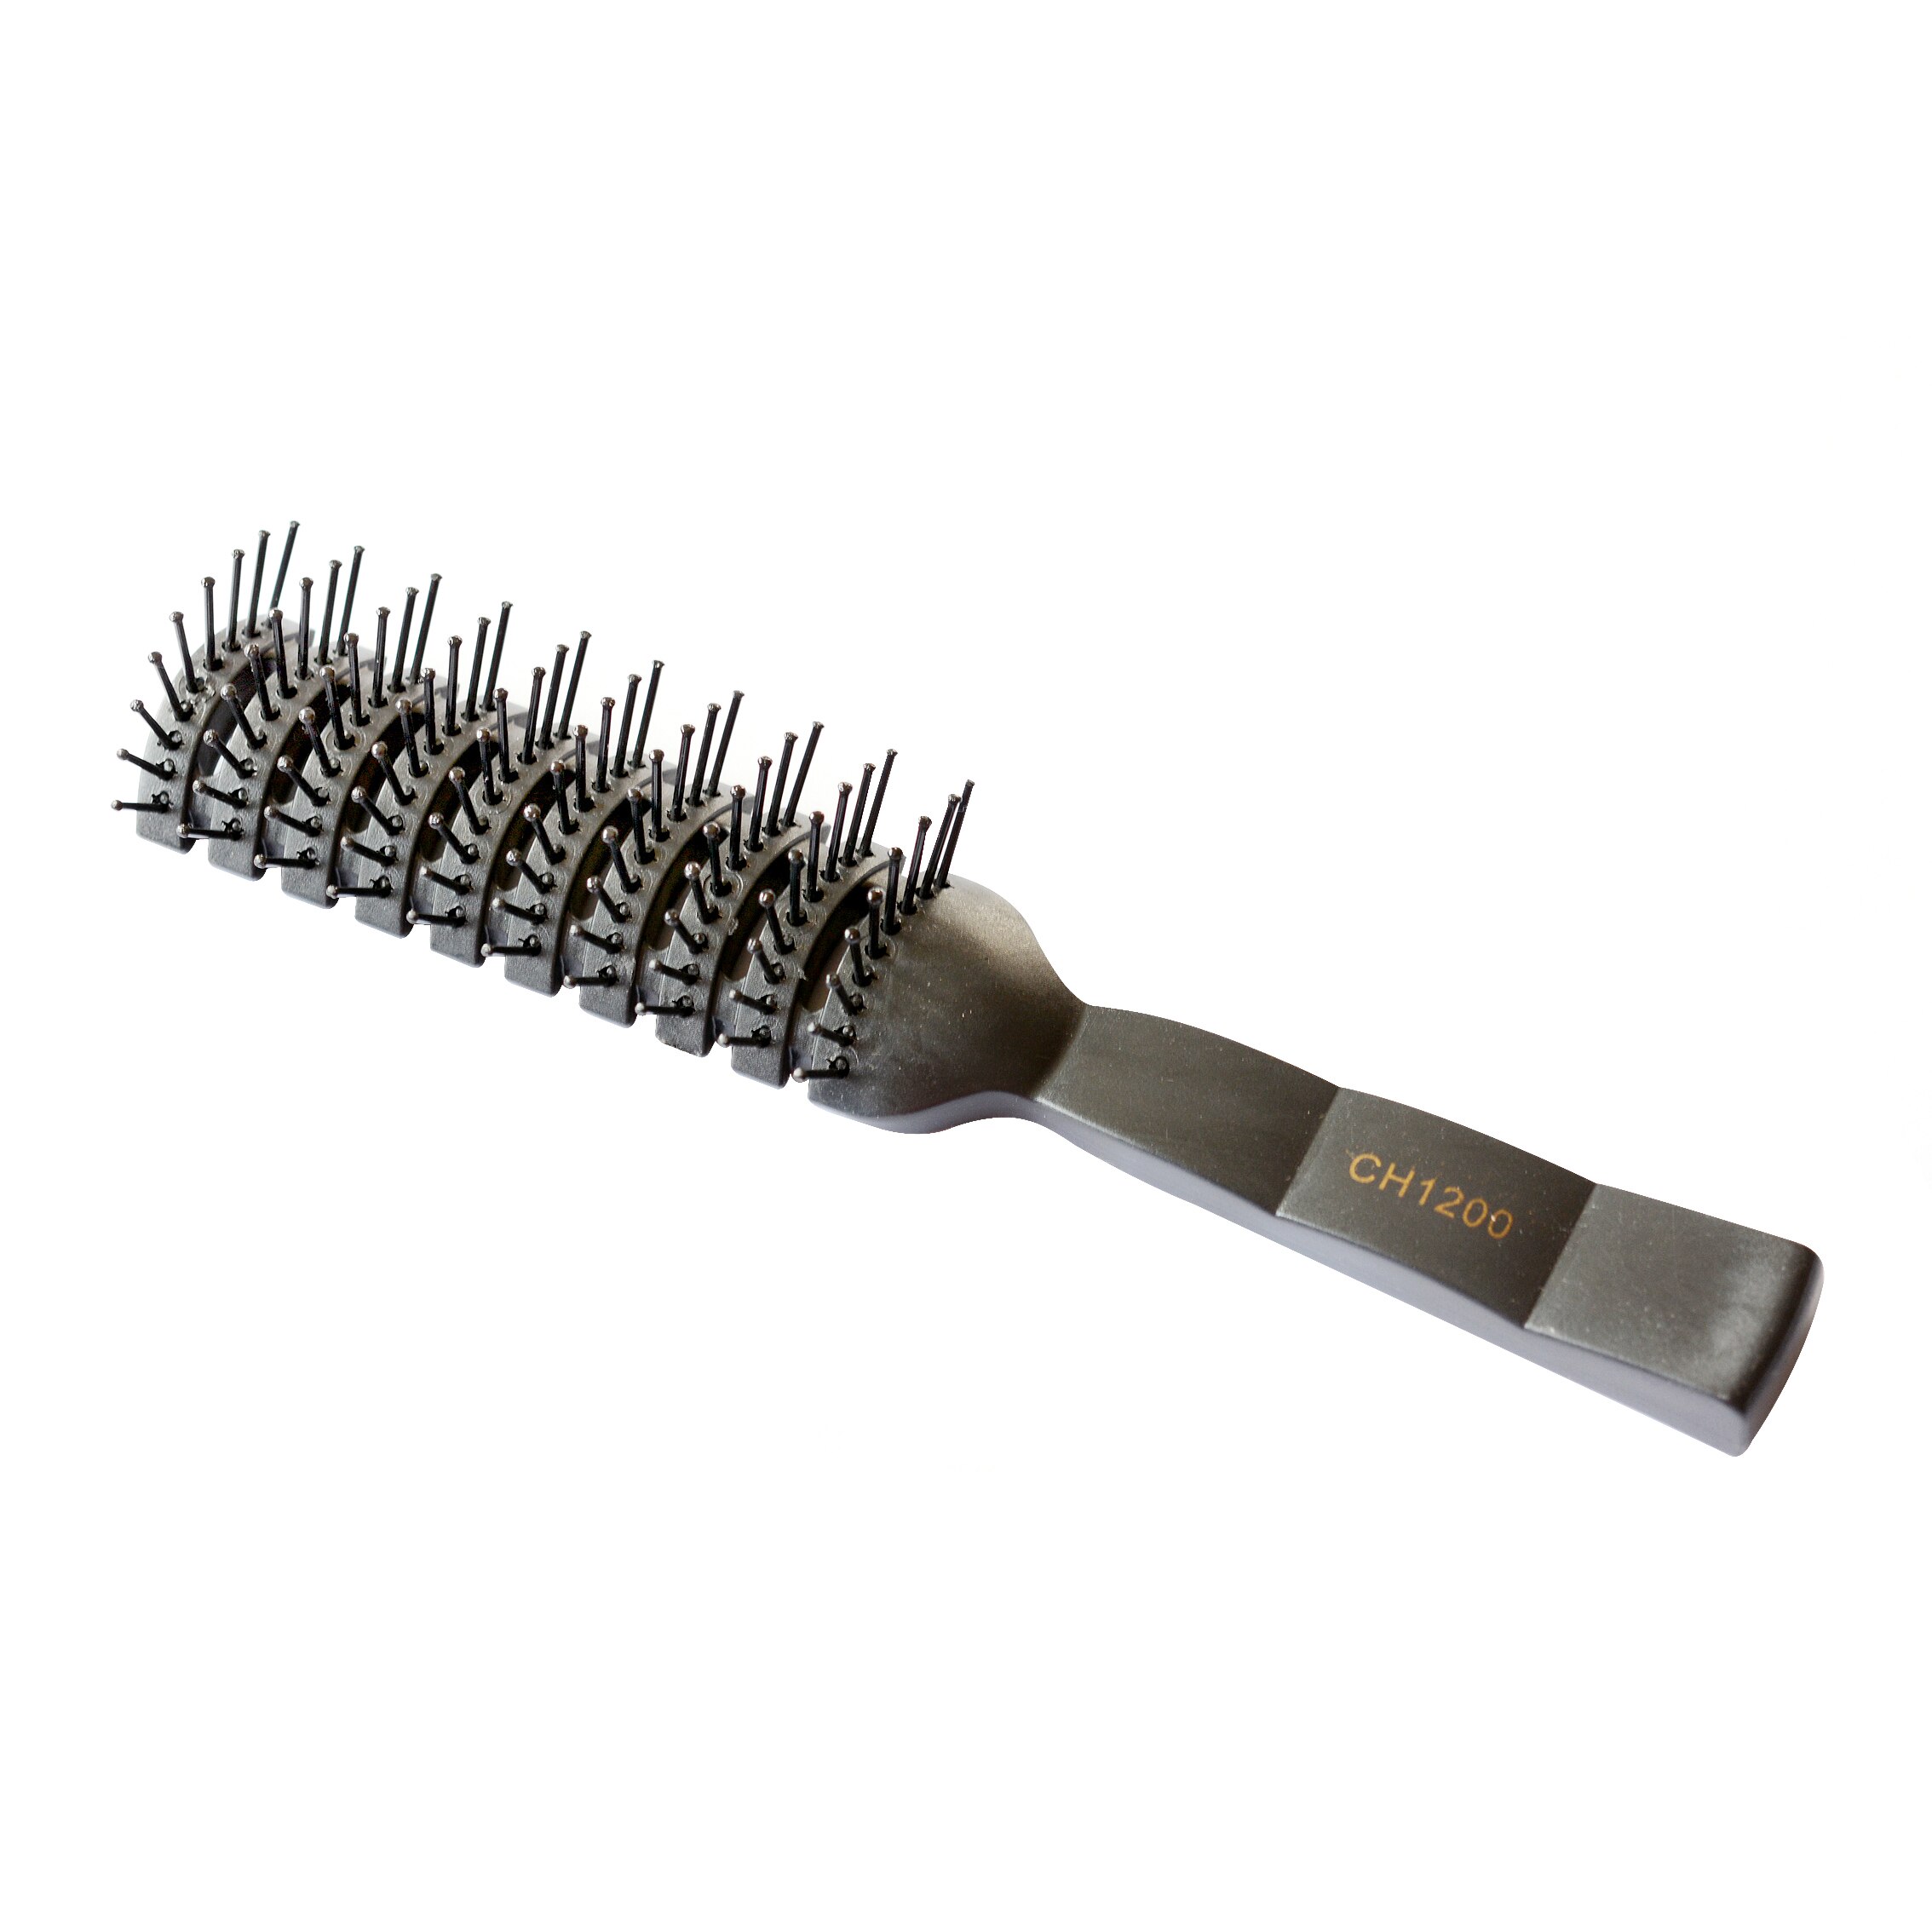 Pro Hairdressing Hair Salon Barber Anti-static Heat Comb Hair Wig Styling Tool Comb Brush Healthy Massage Reduce Hair Loss Tools